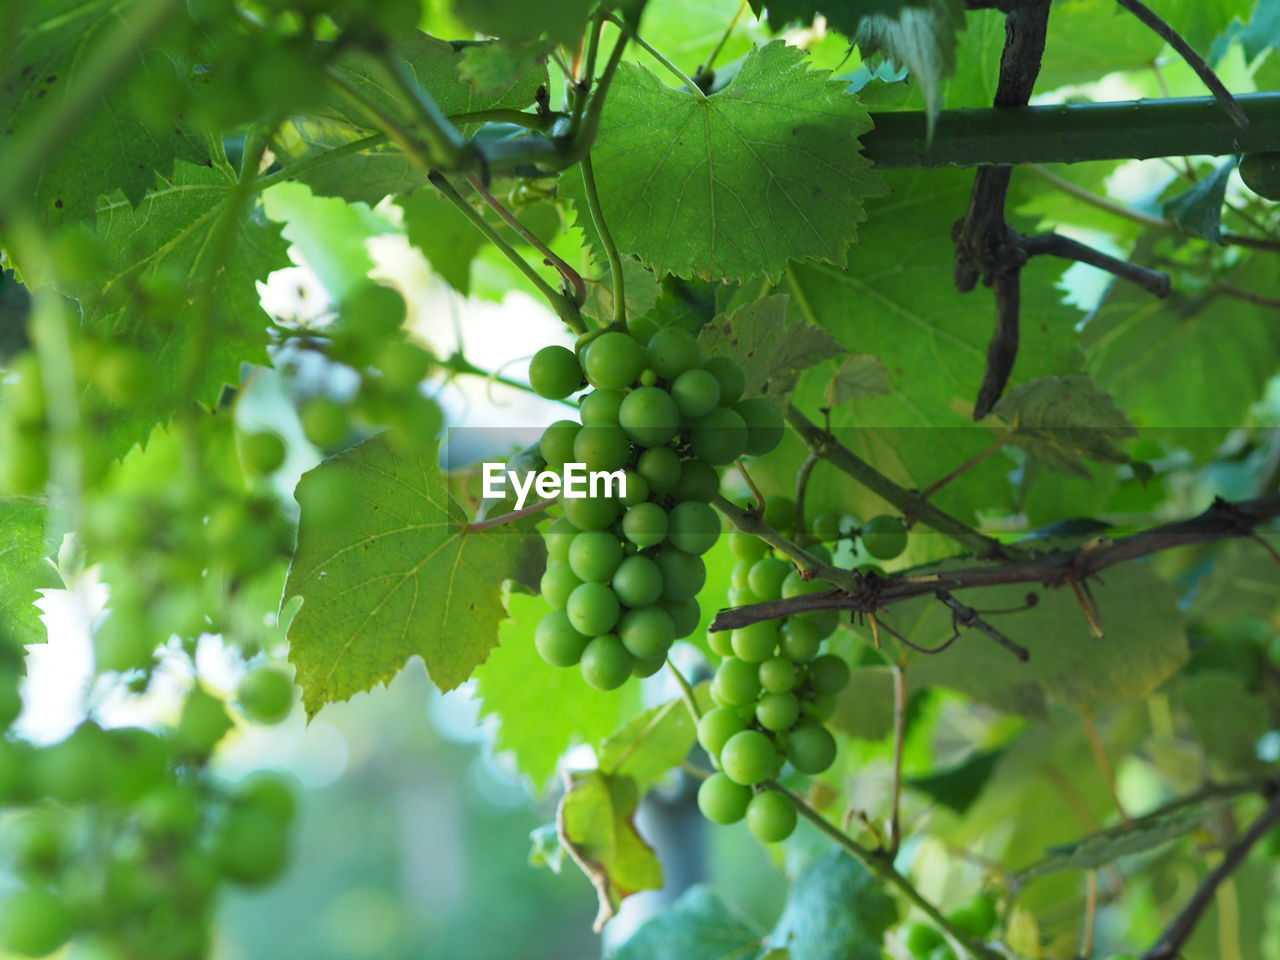 LOW ANGLE VIEW OF GRAPES GROWING ON PLANT